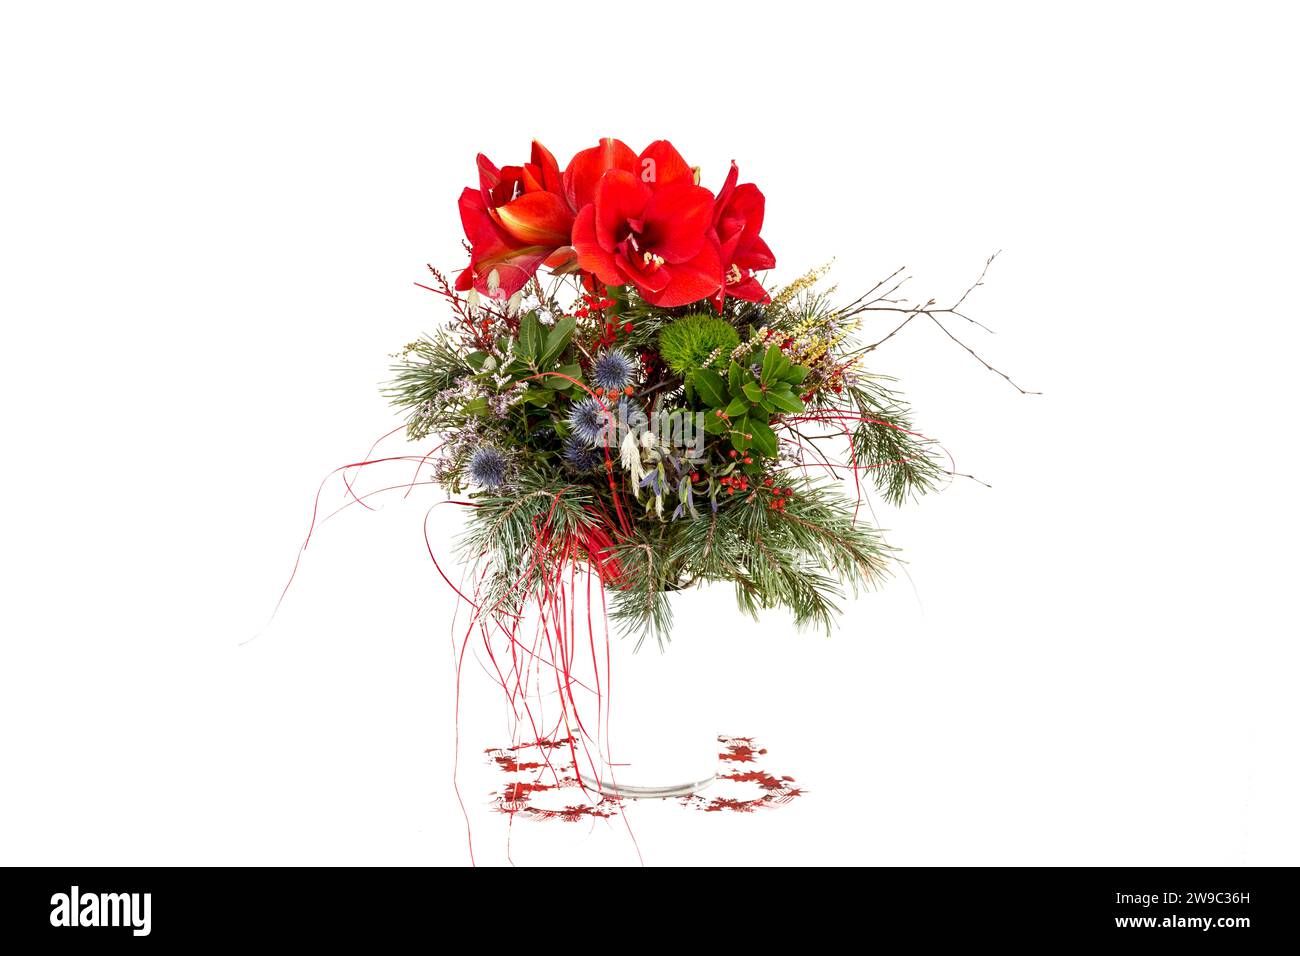 Christmas bouquet with amaryllis flowers in a white vase, background white Stock Photo